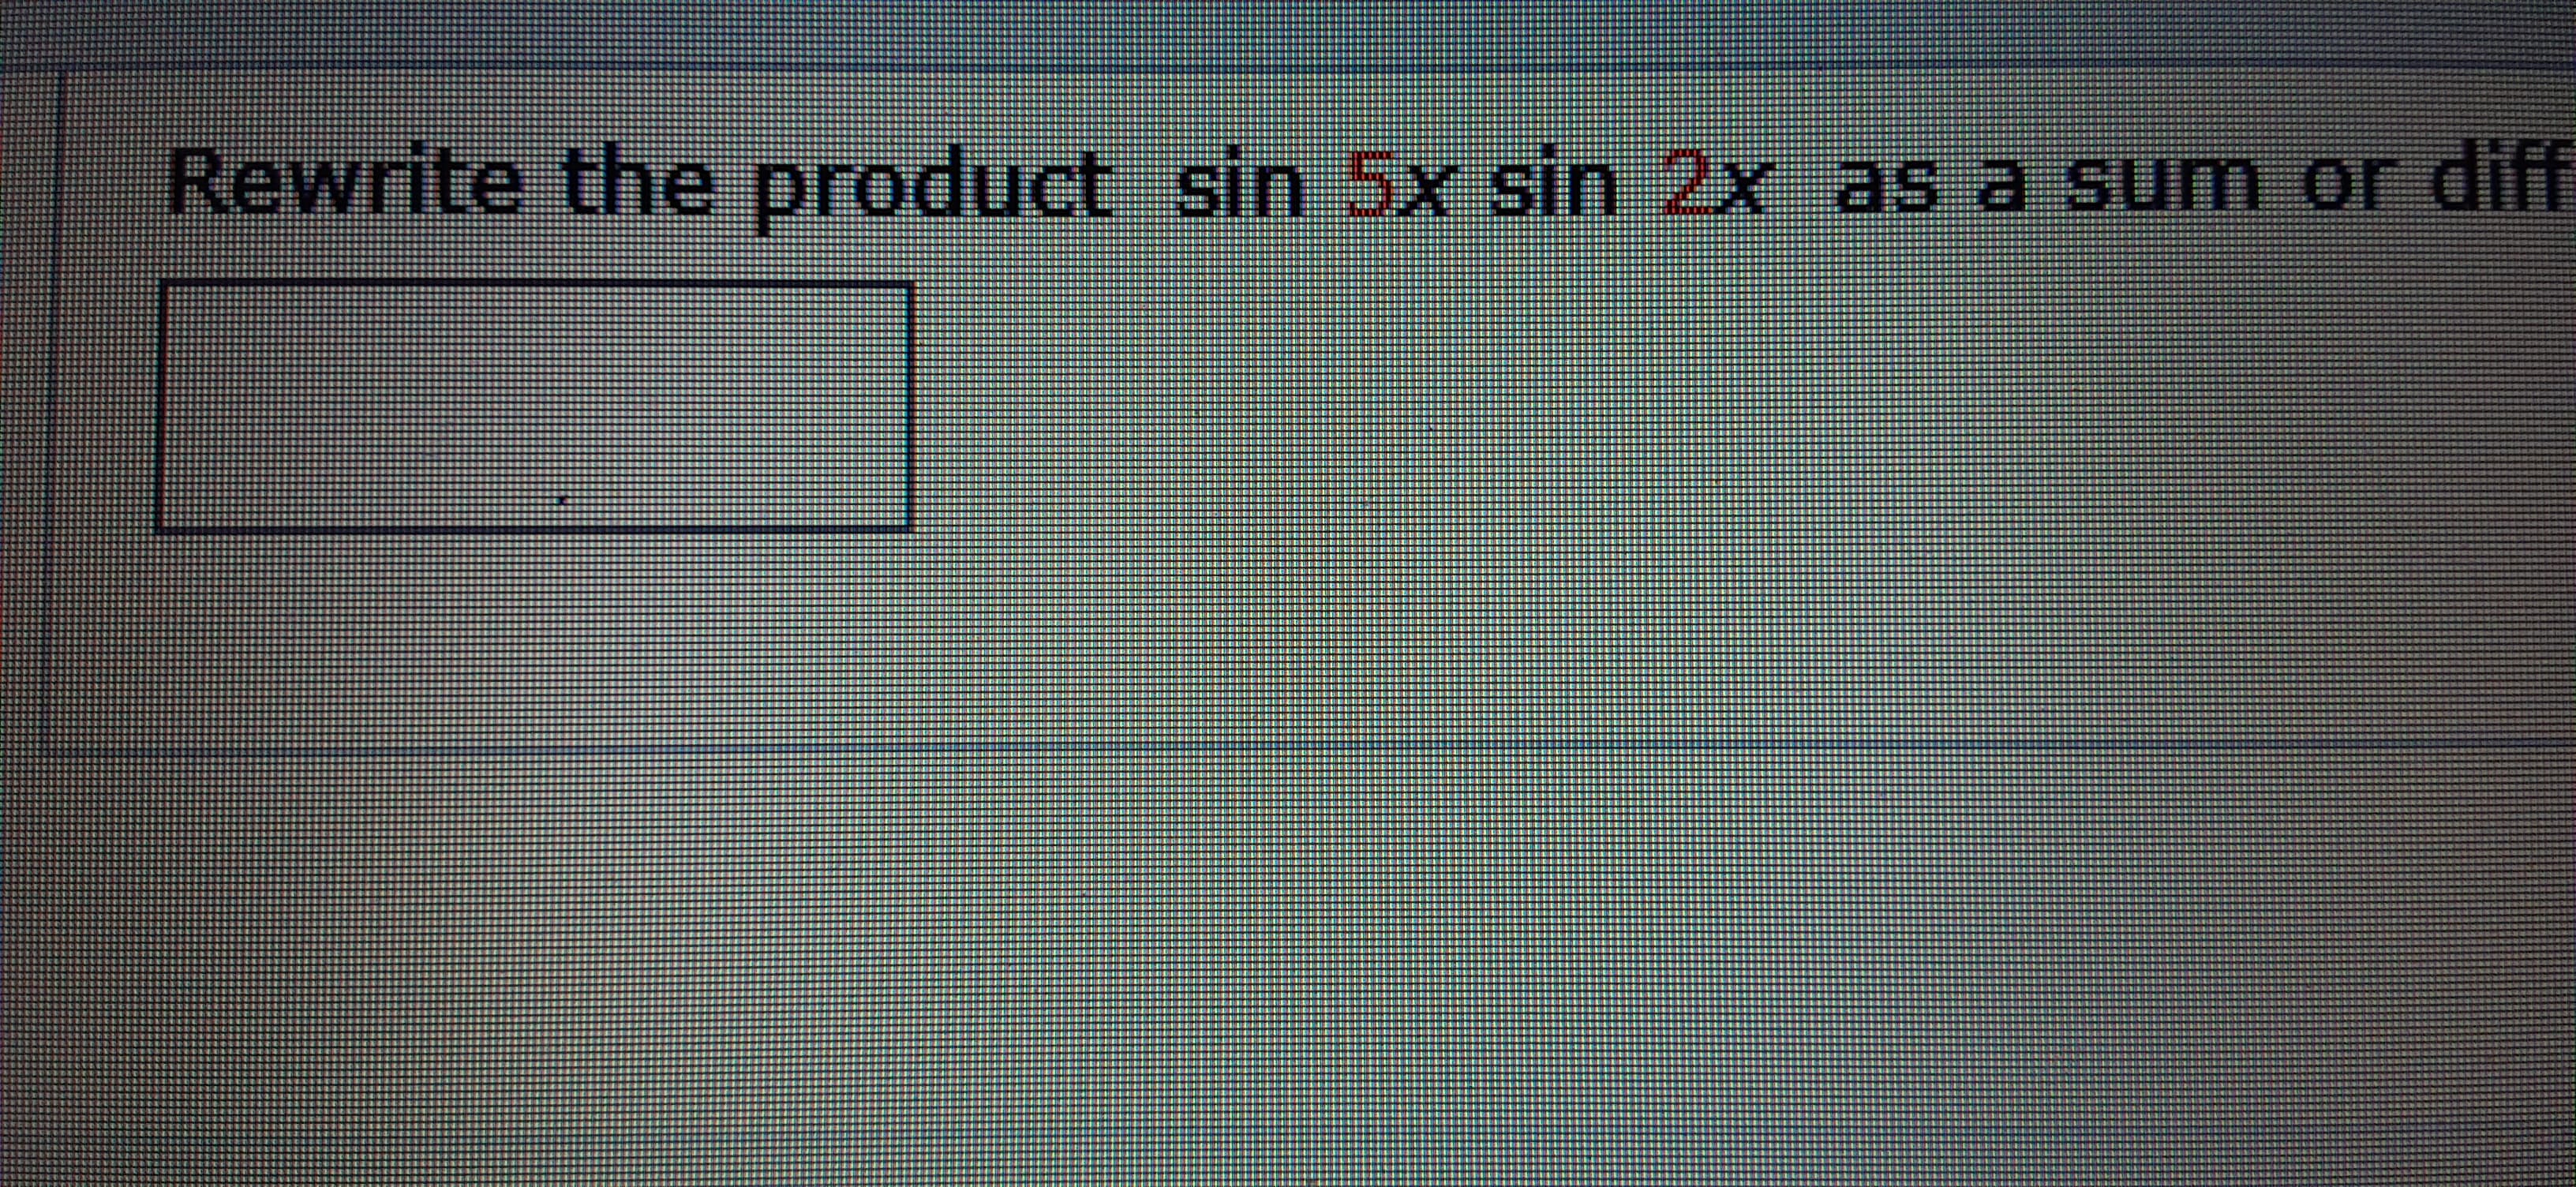 Rewrite the product sin 5x sin 2x as a sum
